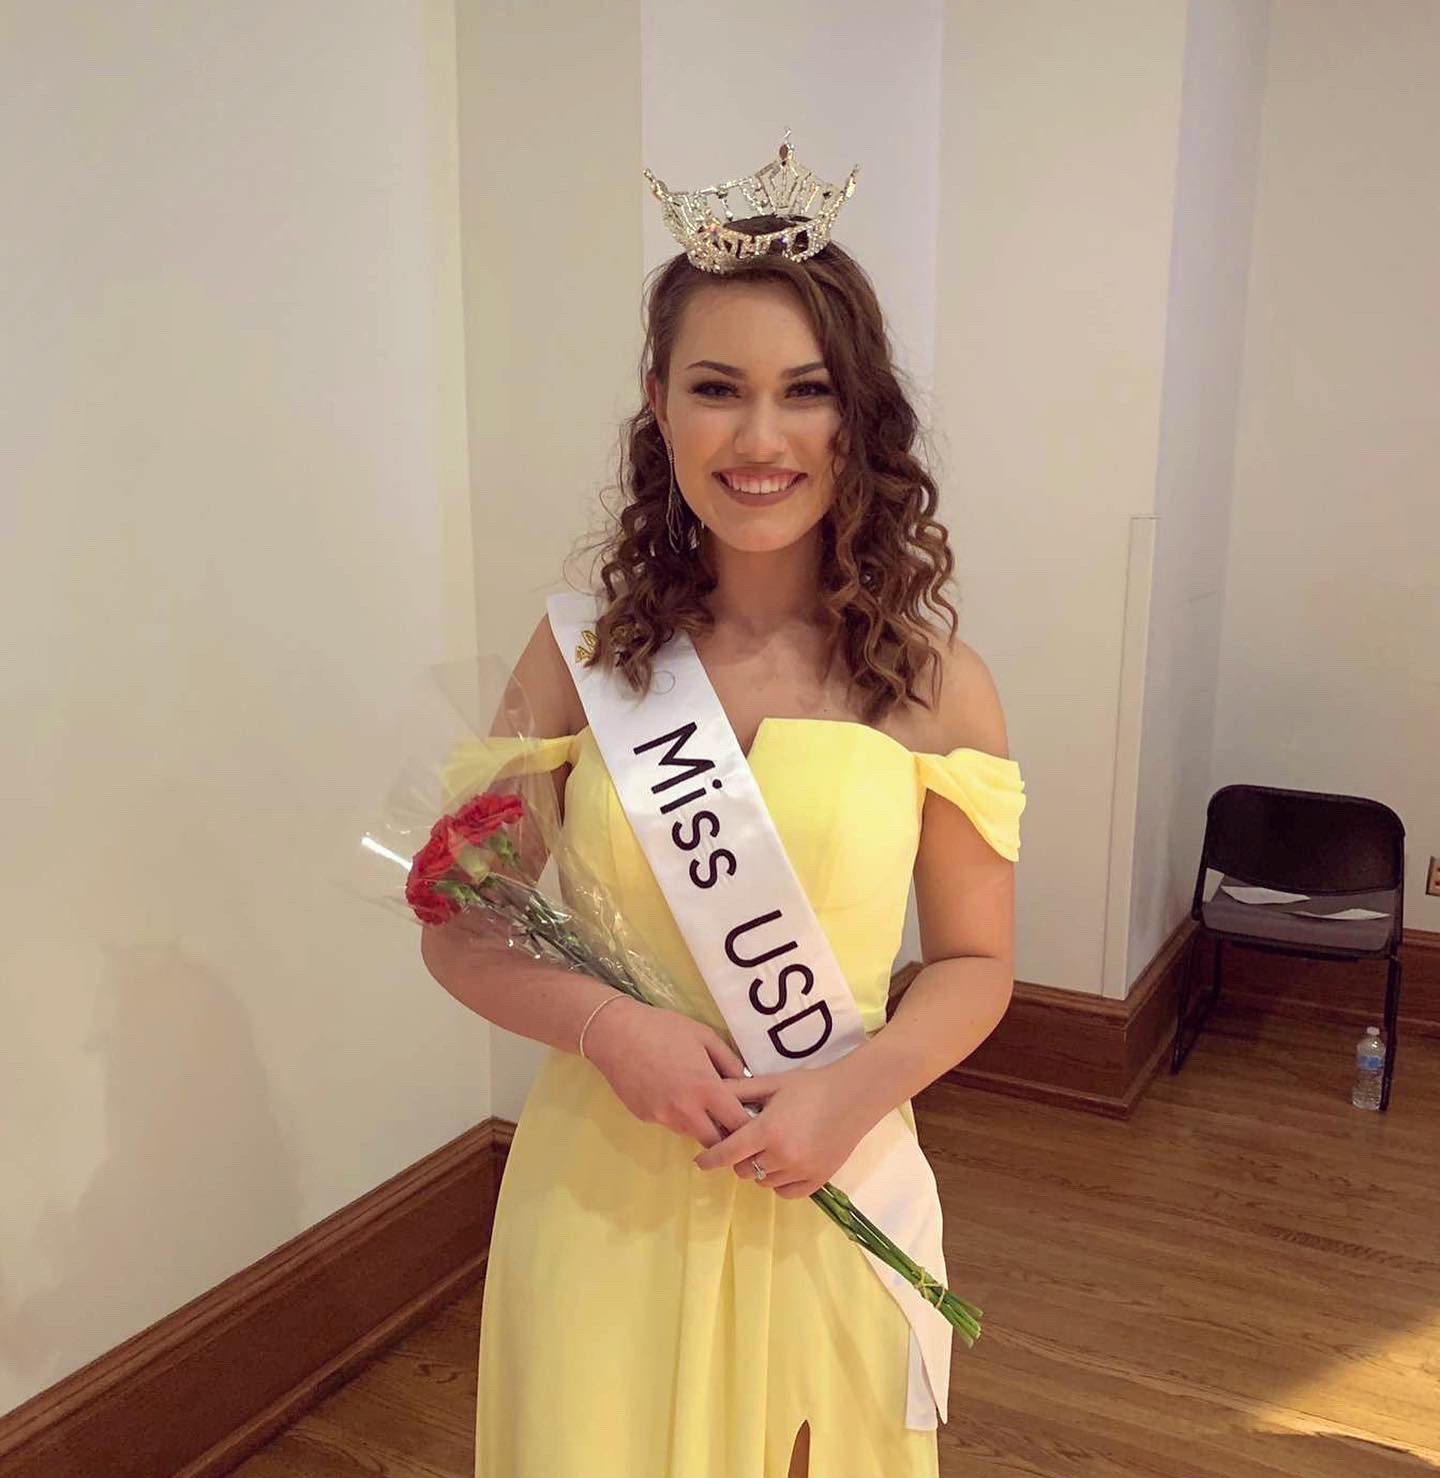 ‘I could not believe they said my name’: Emma Salzwedel named Miss USD 2020